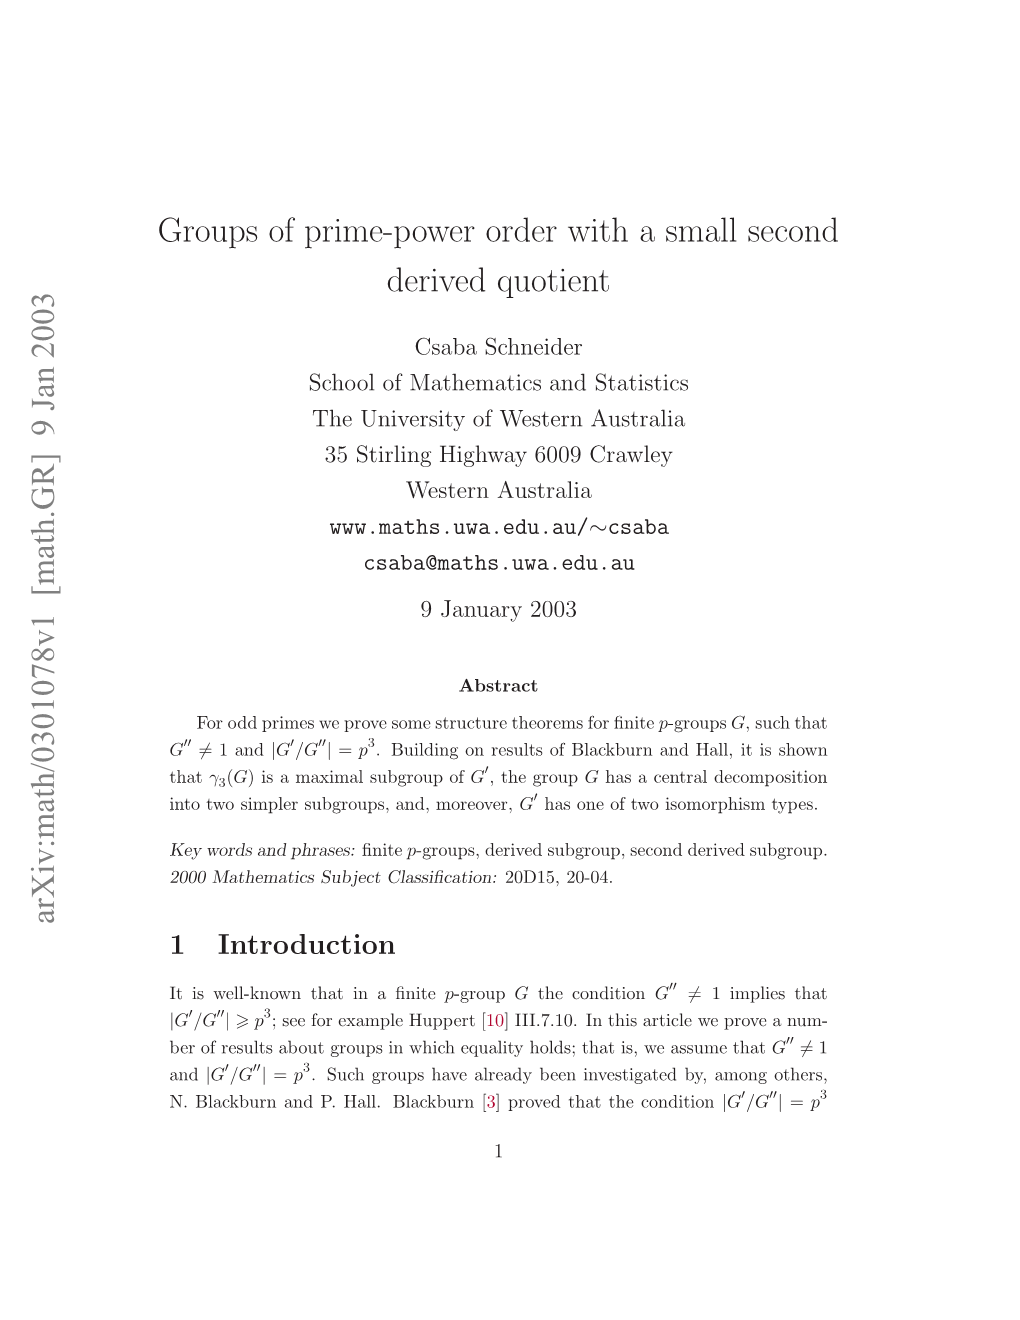 Groups of Prime-Power Order with a Small Second Derived Quotient